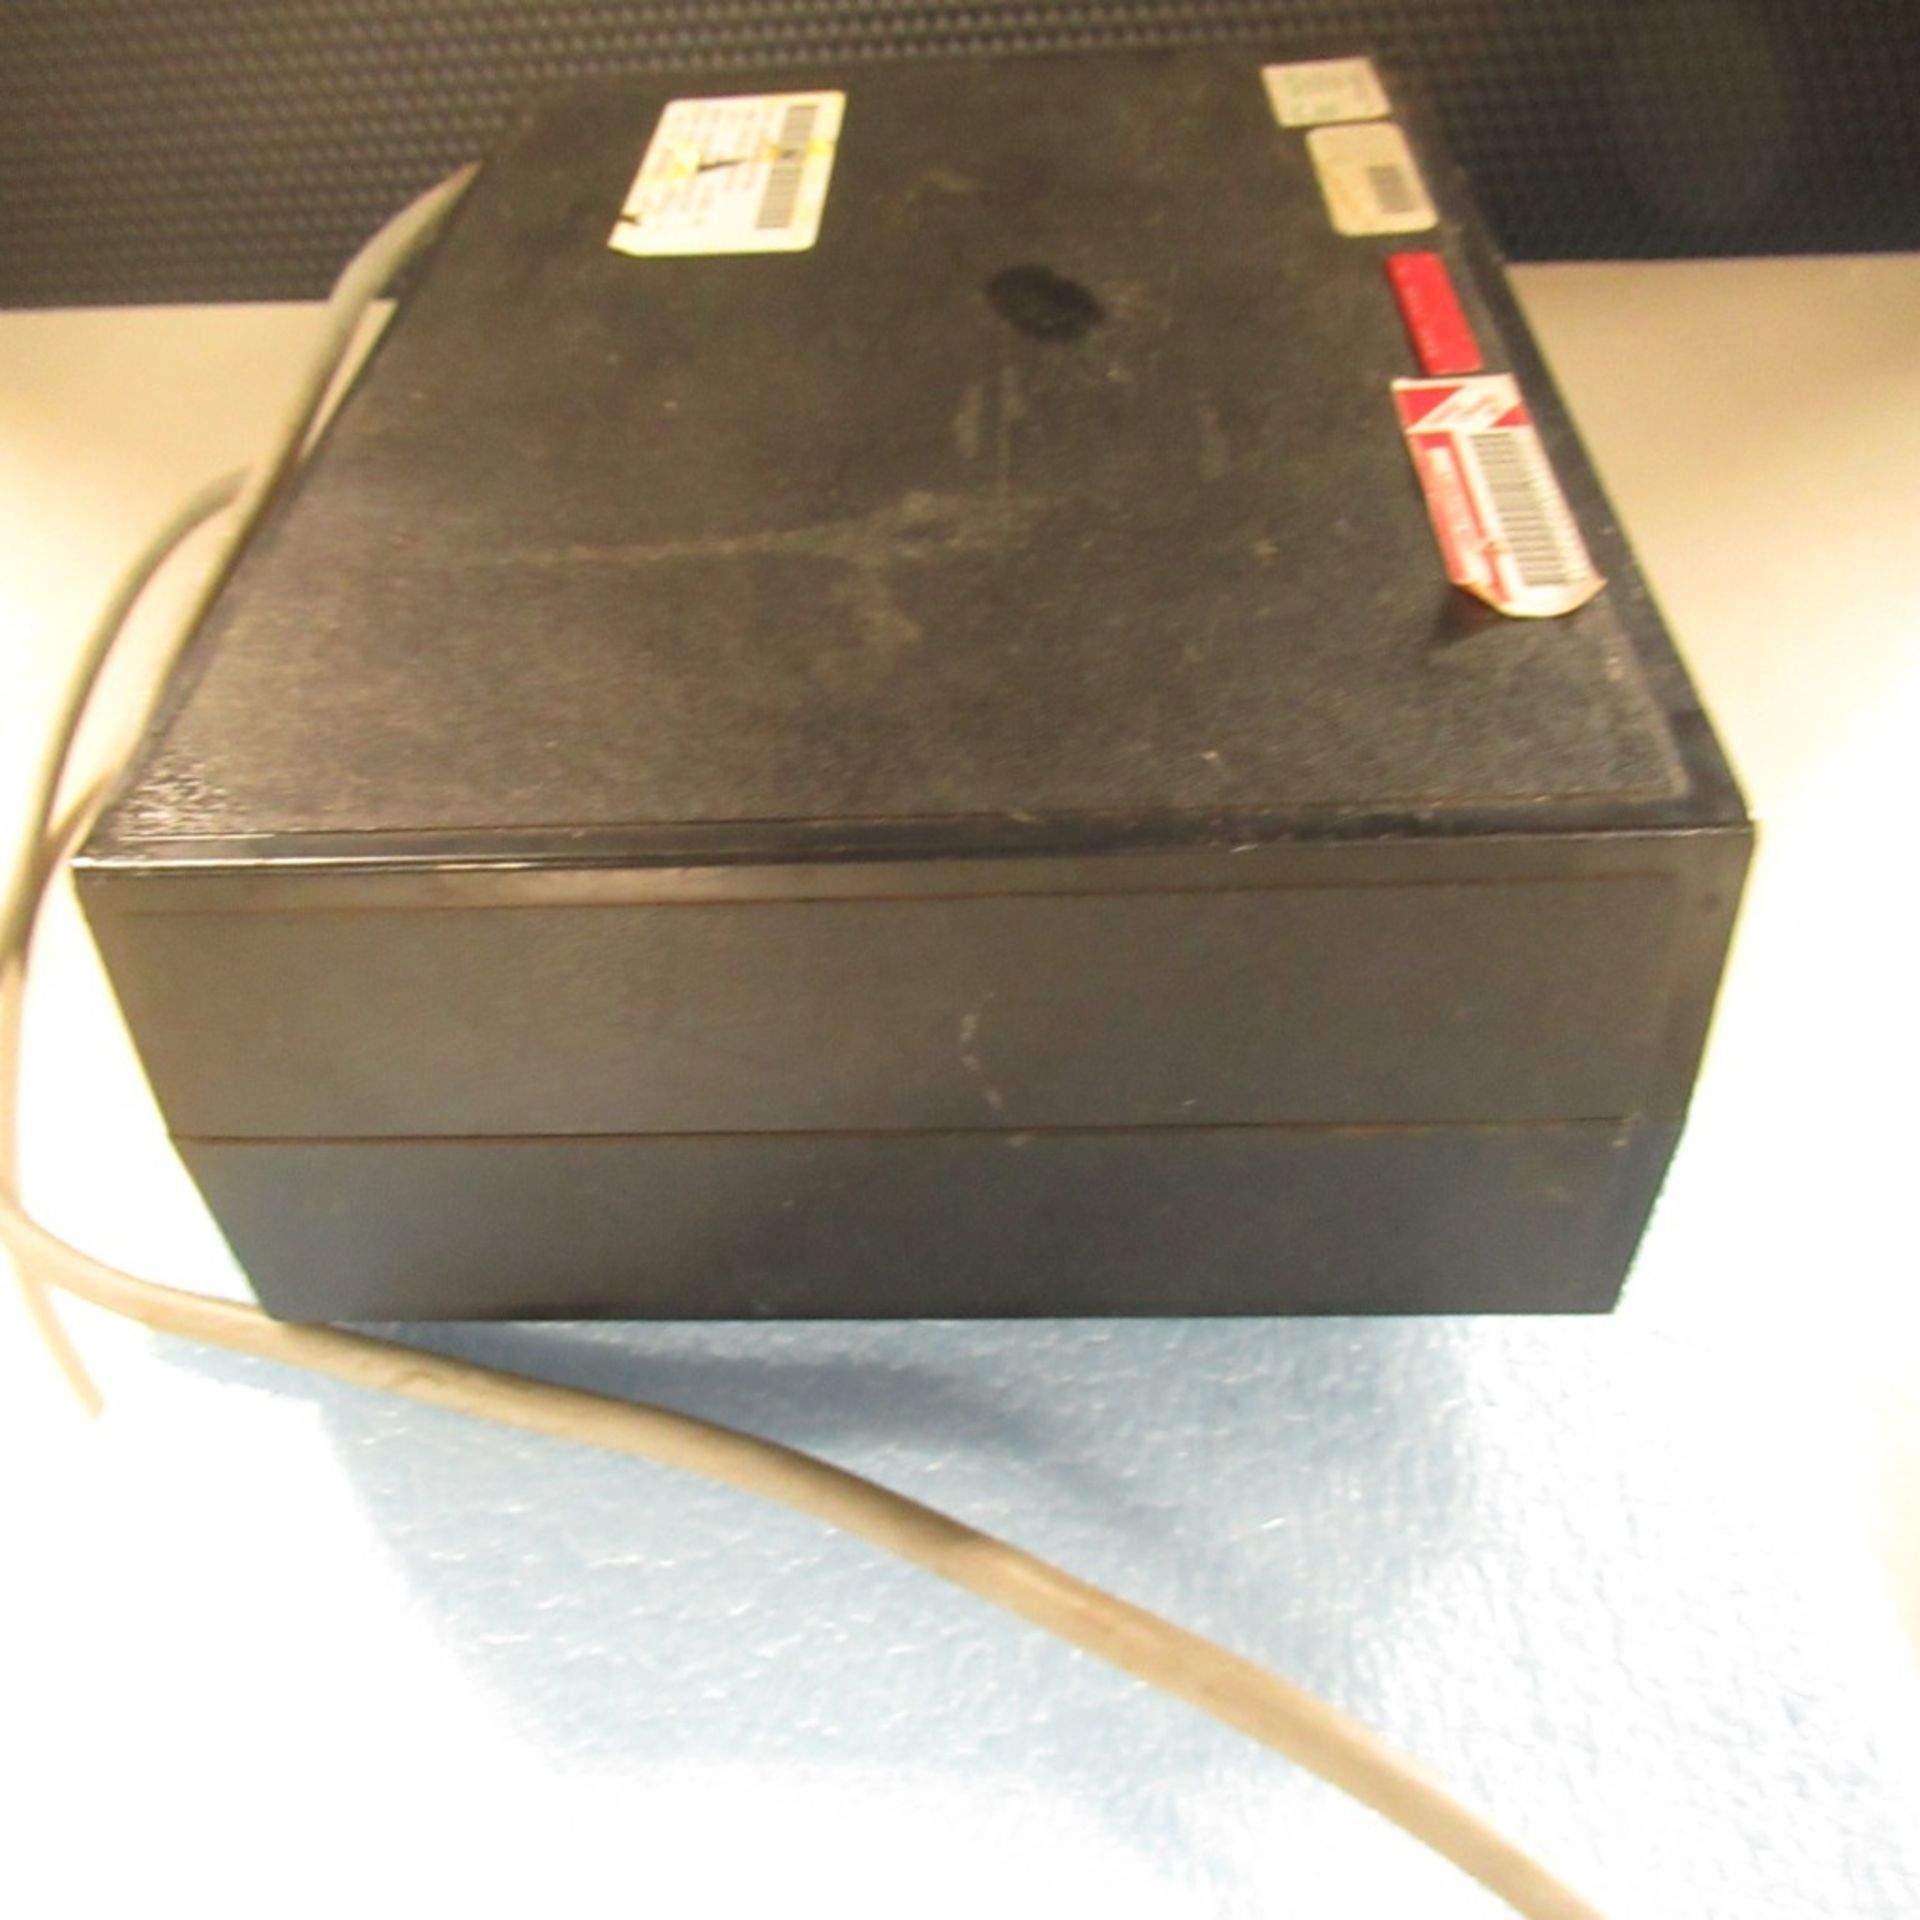 PHOTON SNAP SHOT MODEL 6000 *POWERS ON* NO SCREEN DISPLAY; FARNELL AP20-80 REGULATED POWER SUPPLY * - Image 162 of 222